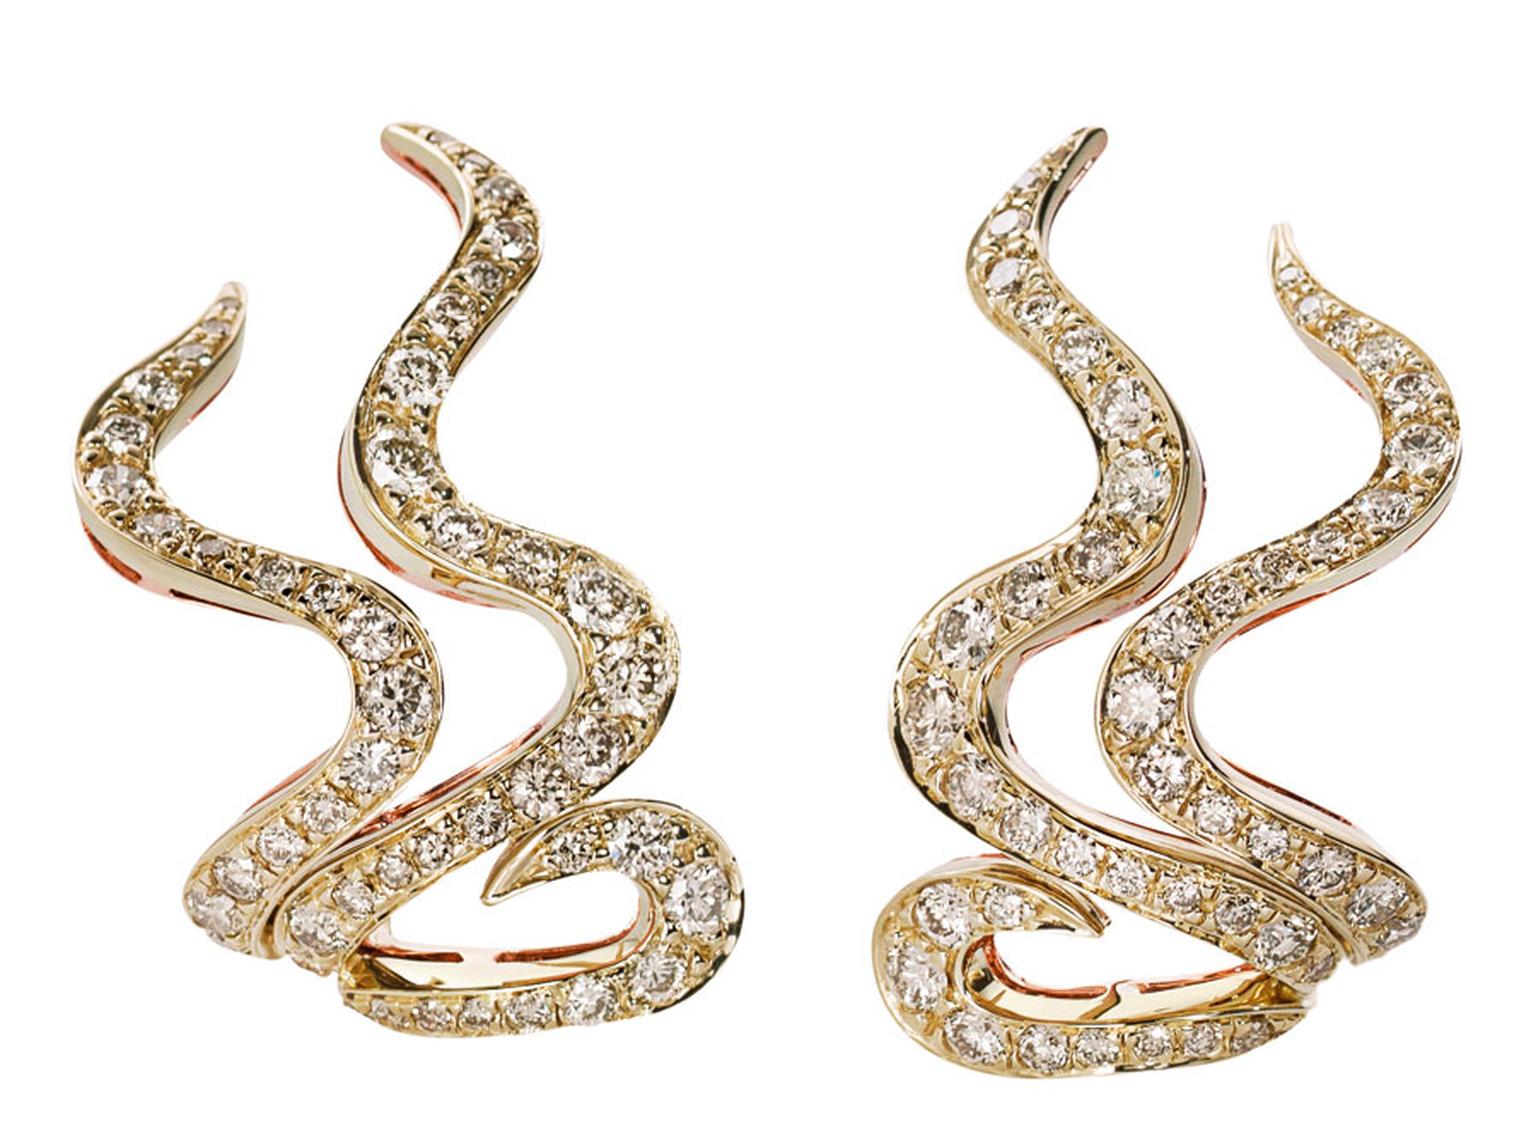 H-Stern-Earrings-in-yellow-and-rose-gold-with-diamonds.jpg